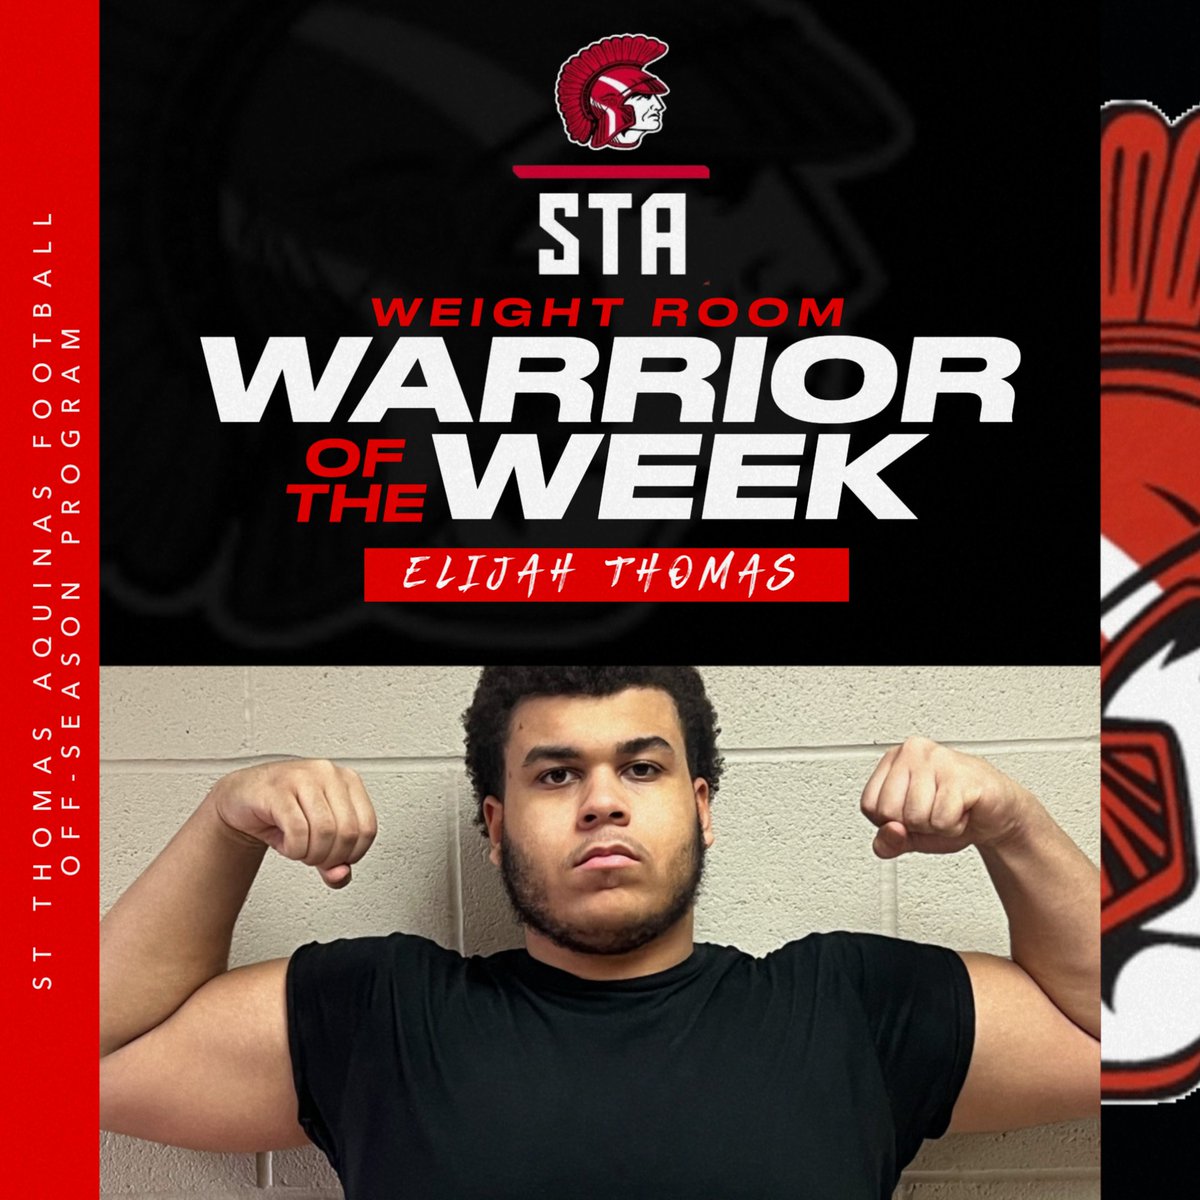 Our WRWW is Elijah Thomas aka ET73.  A highly decorated Jr w/ D1 offers, Elijah is determined to take it to the next level working to add strength to his 6'3' 310lbs frame! ET73 will be one of the top names to watch this season in NJ football. #BEGREAT #STAWEIGHTROOMWARRIOR